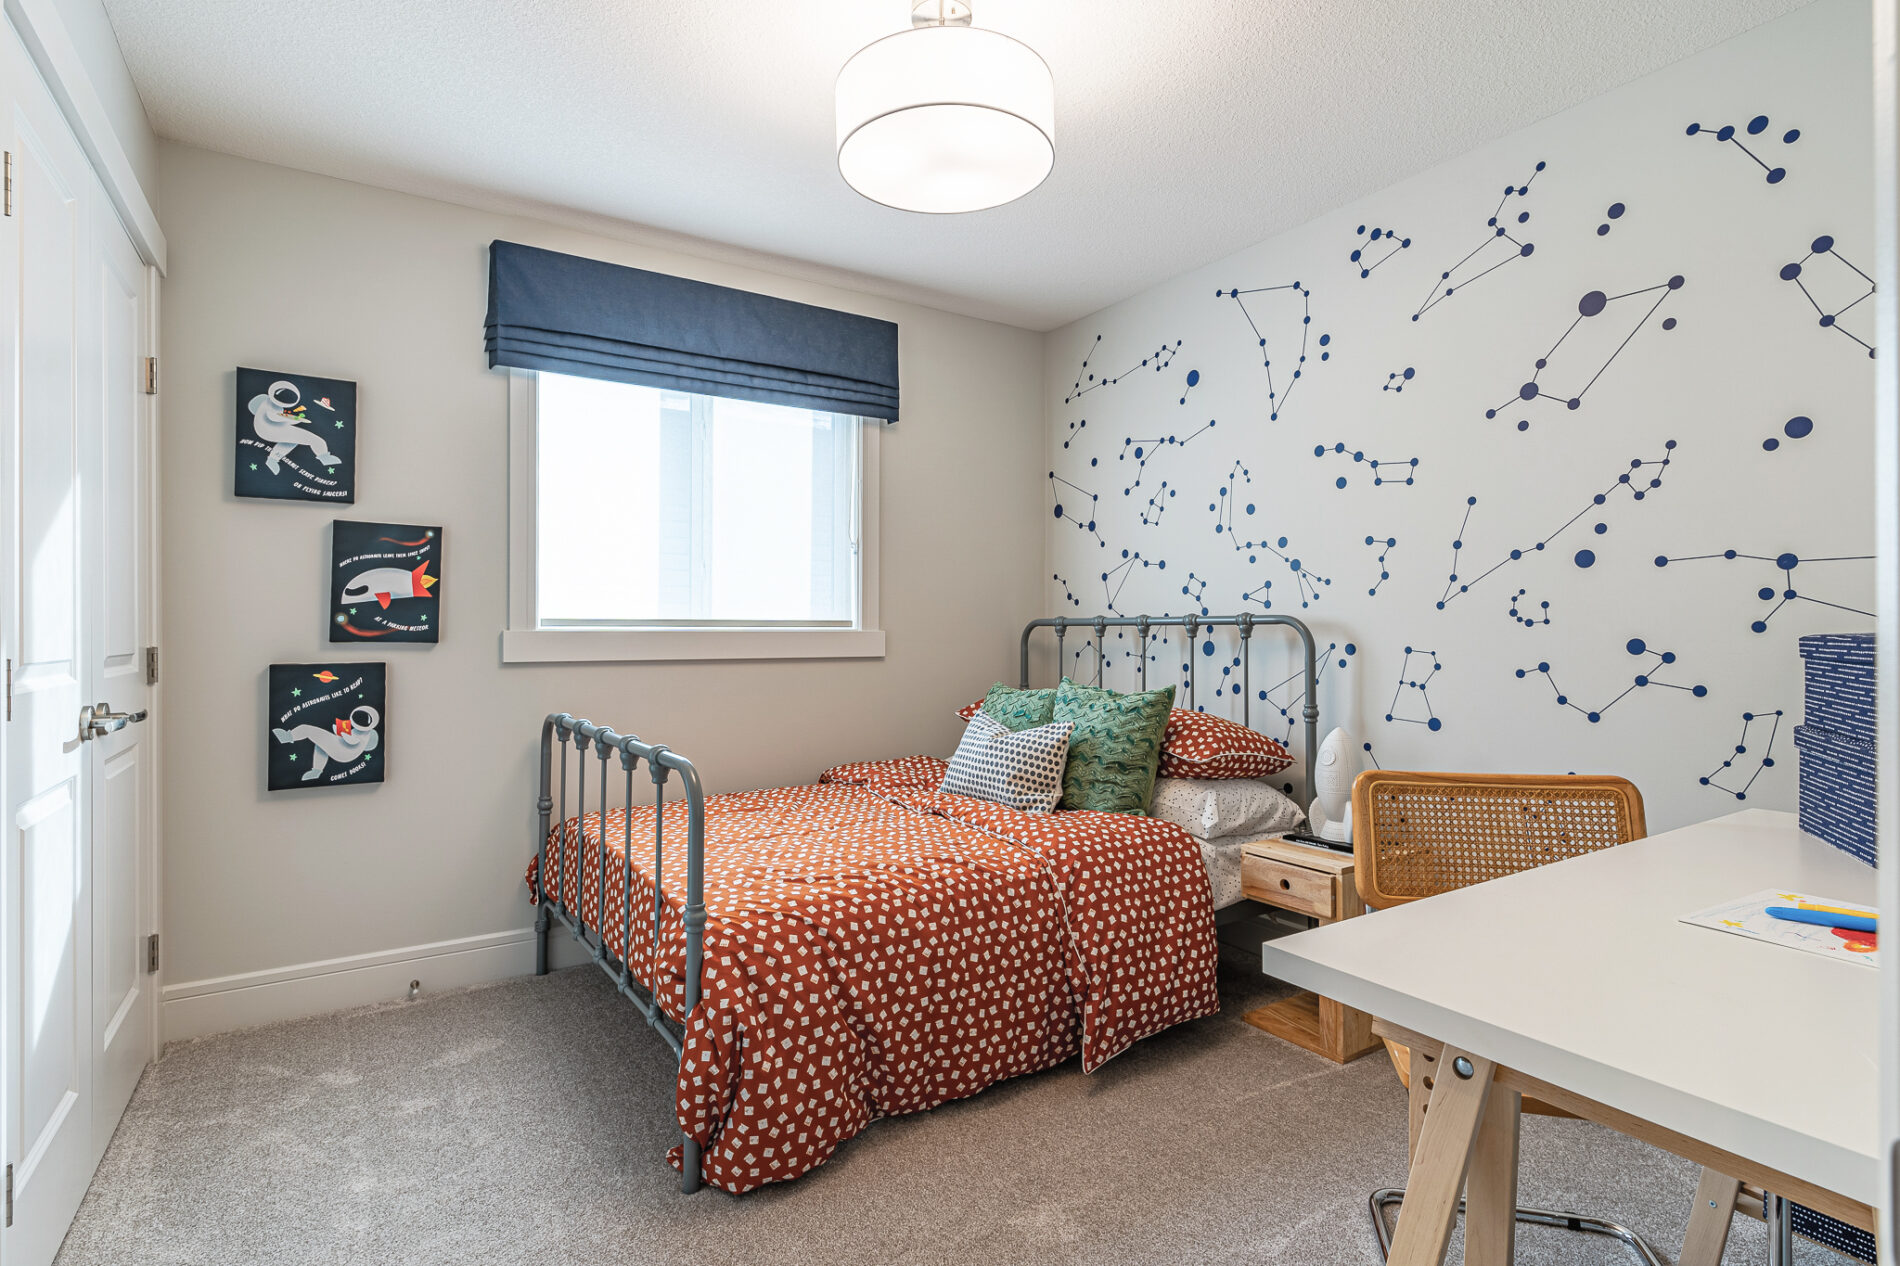 A secondary bedroom with blue constellation decals behind the wrought iron bed with orange bedding